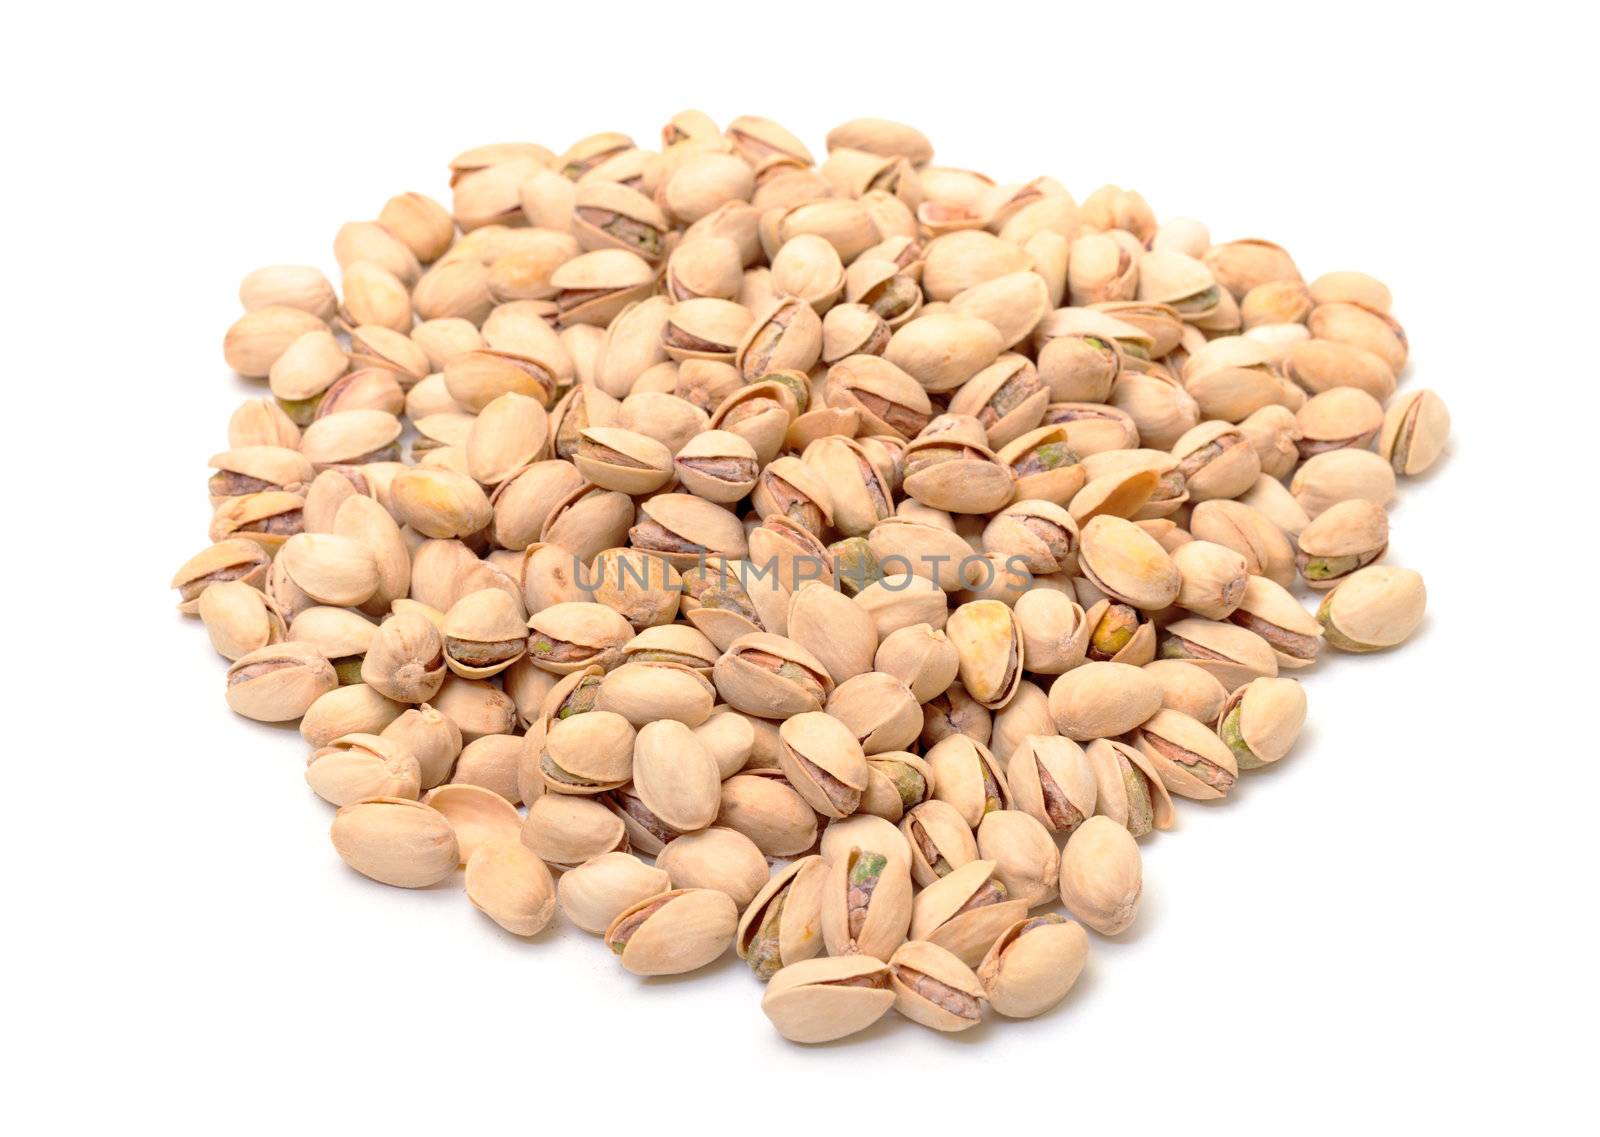 Shelled Pistachios Nuts by Discovod